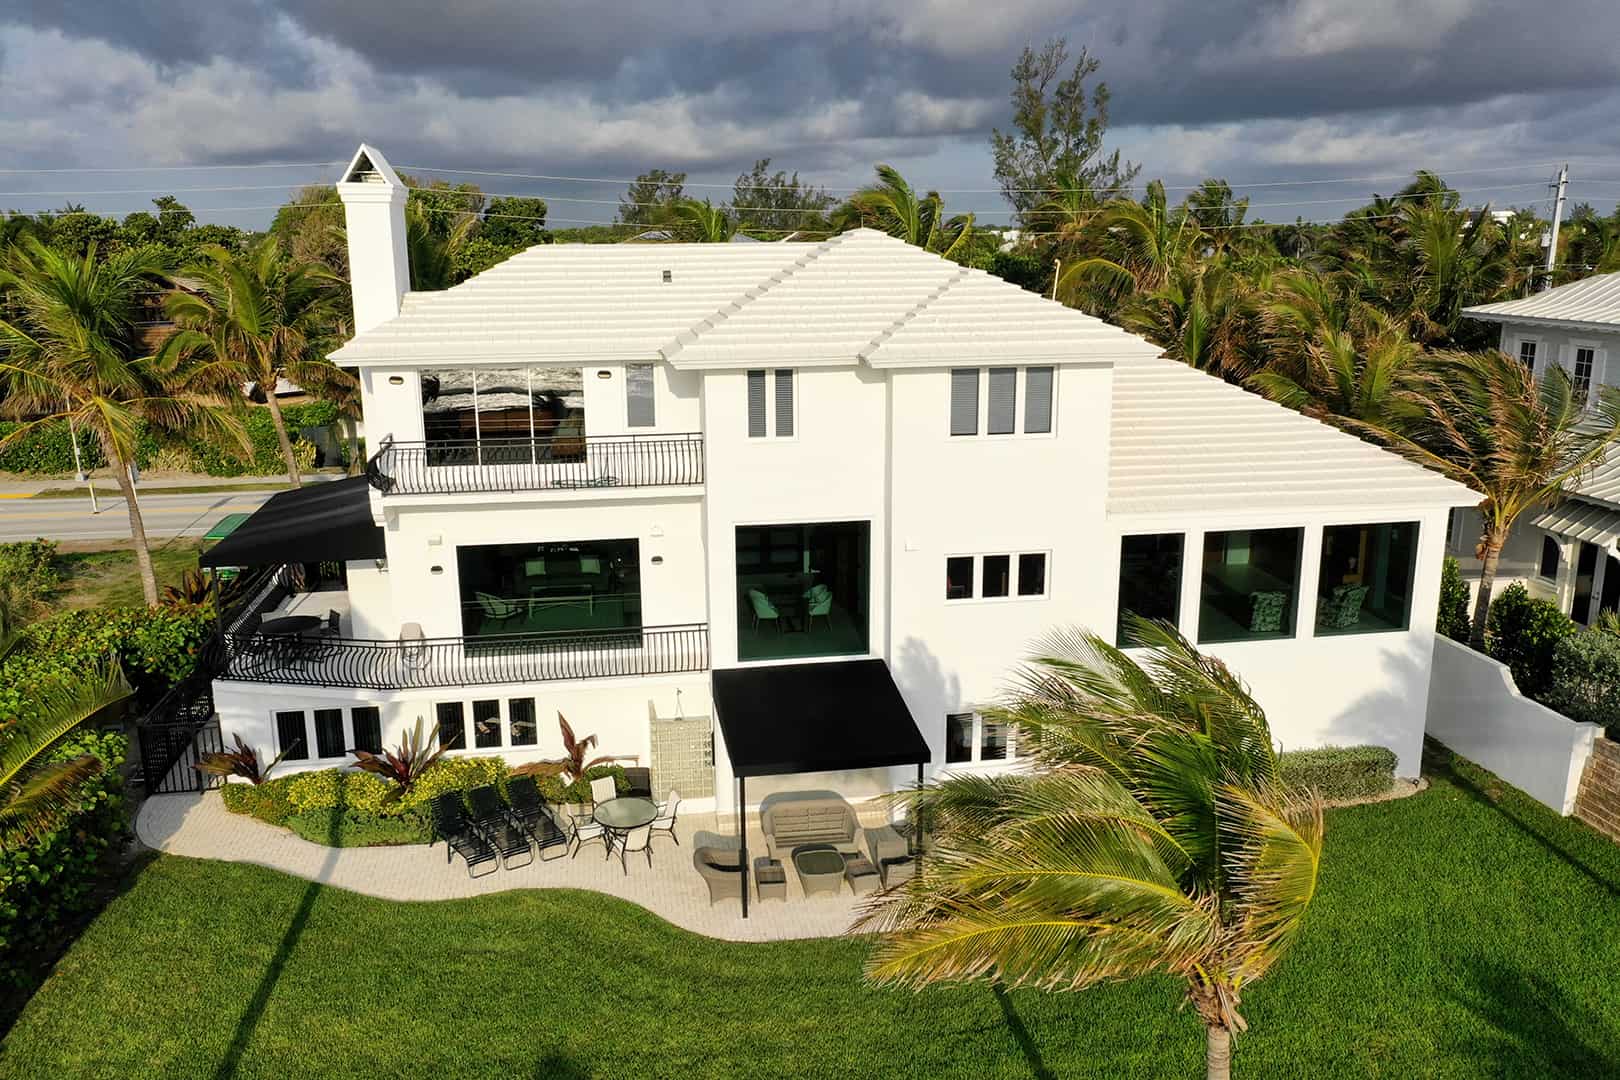 Drone view of large white home with black trim, three stories, front view, residential neighborhood, multiple double panel impact windows, FS-300 Maxi View Impact Storefront windows by Aldora, manicured lawn, palm trees, tropical environment